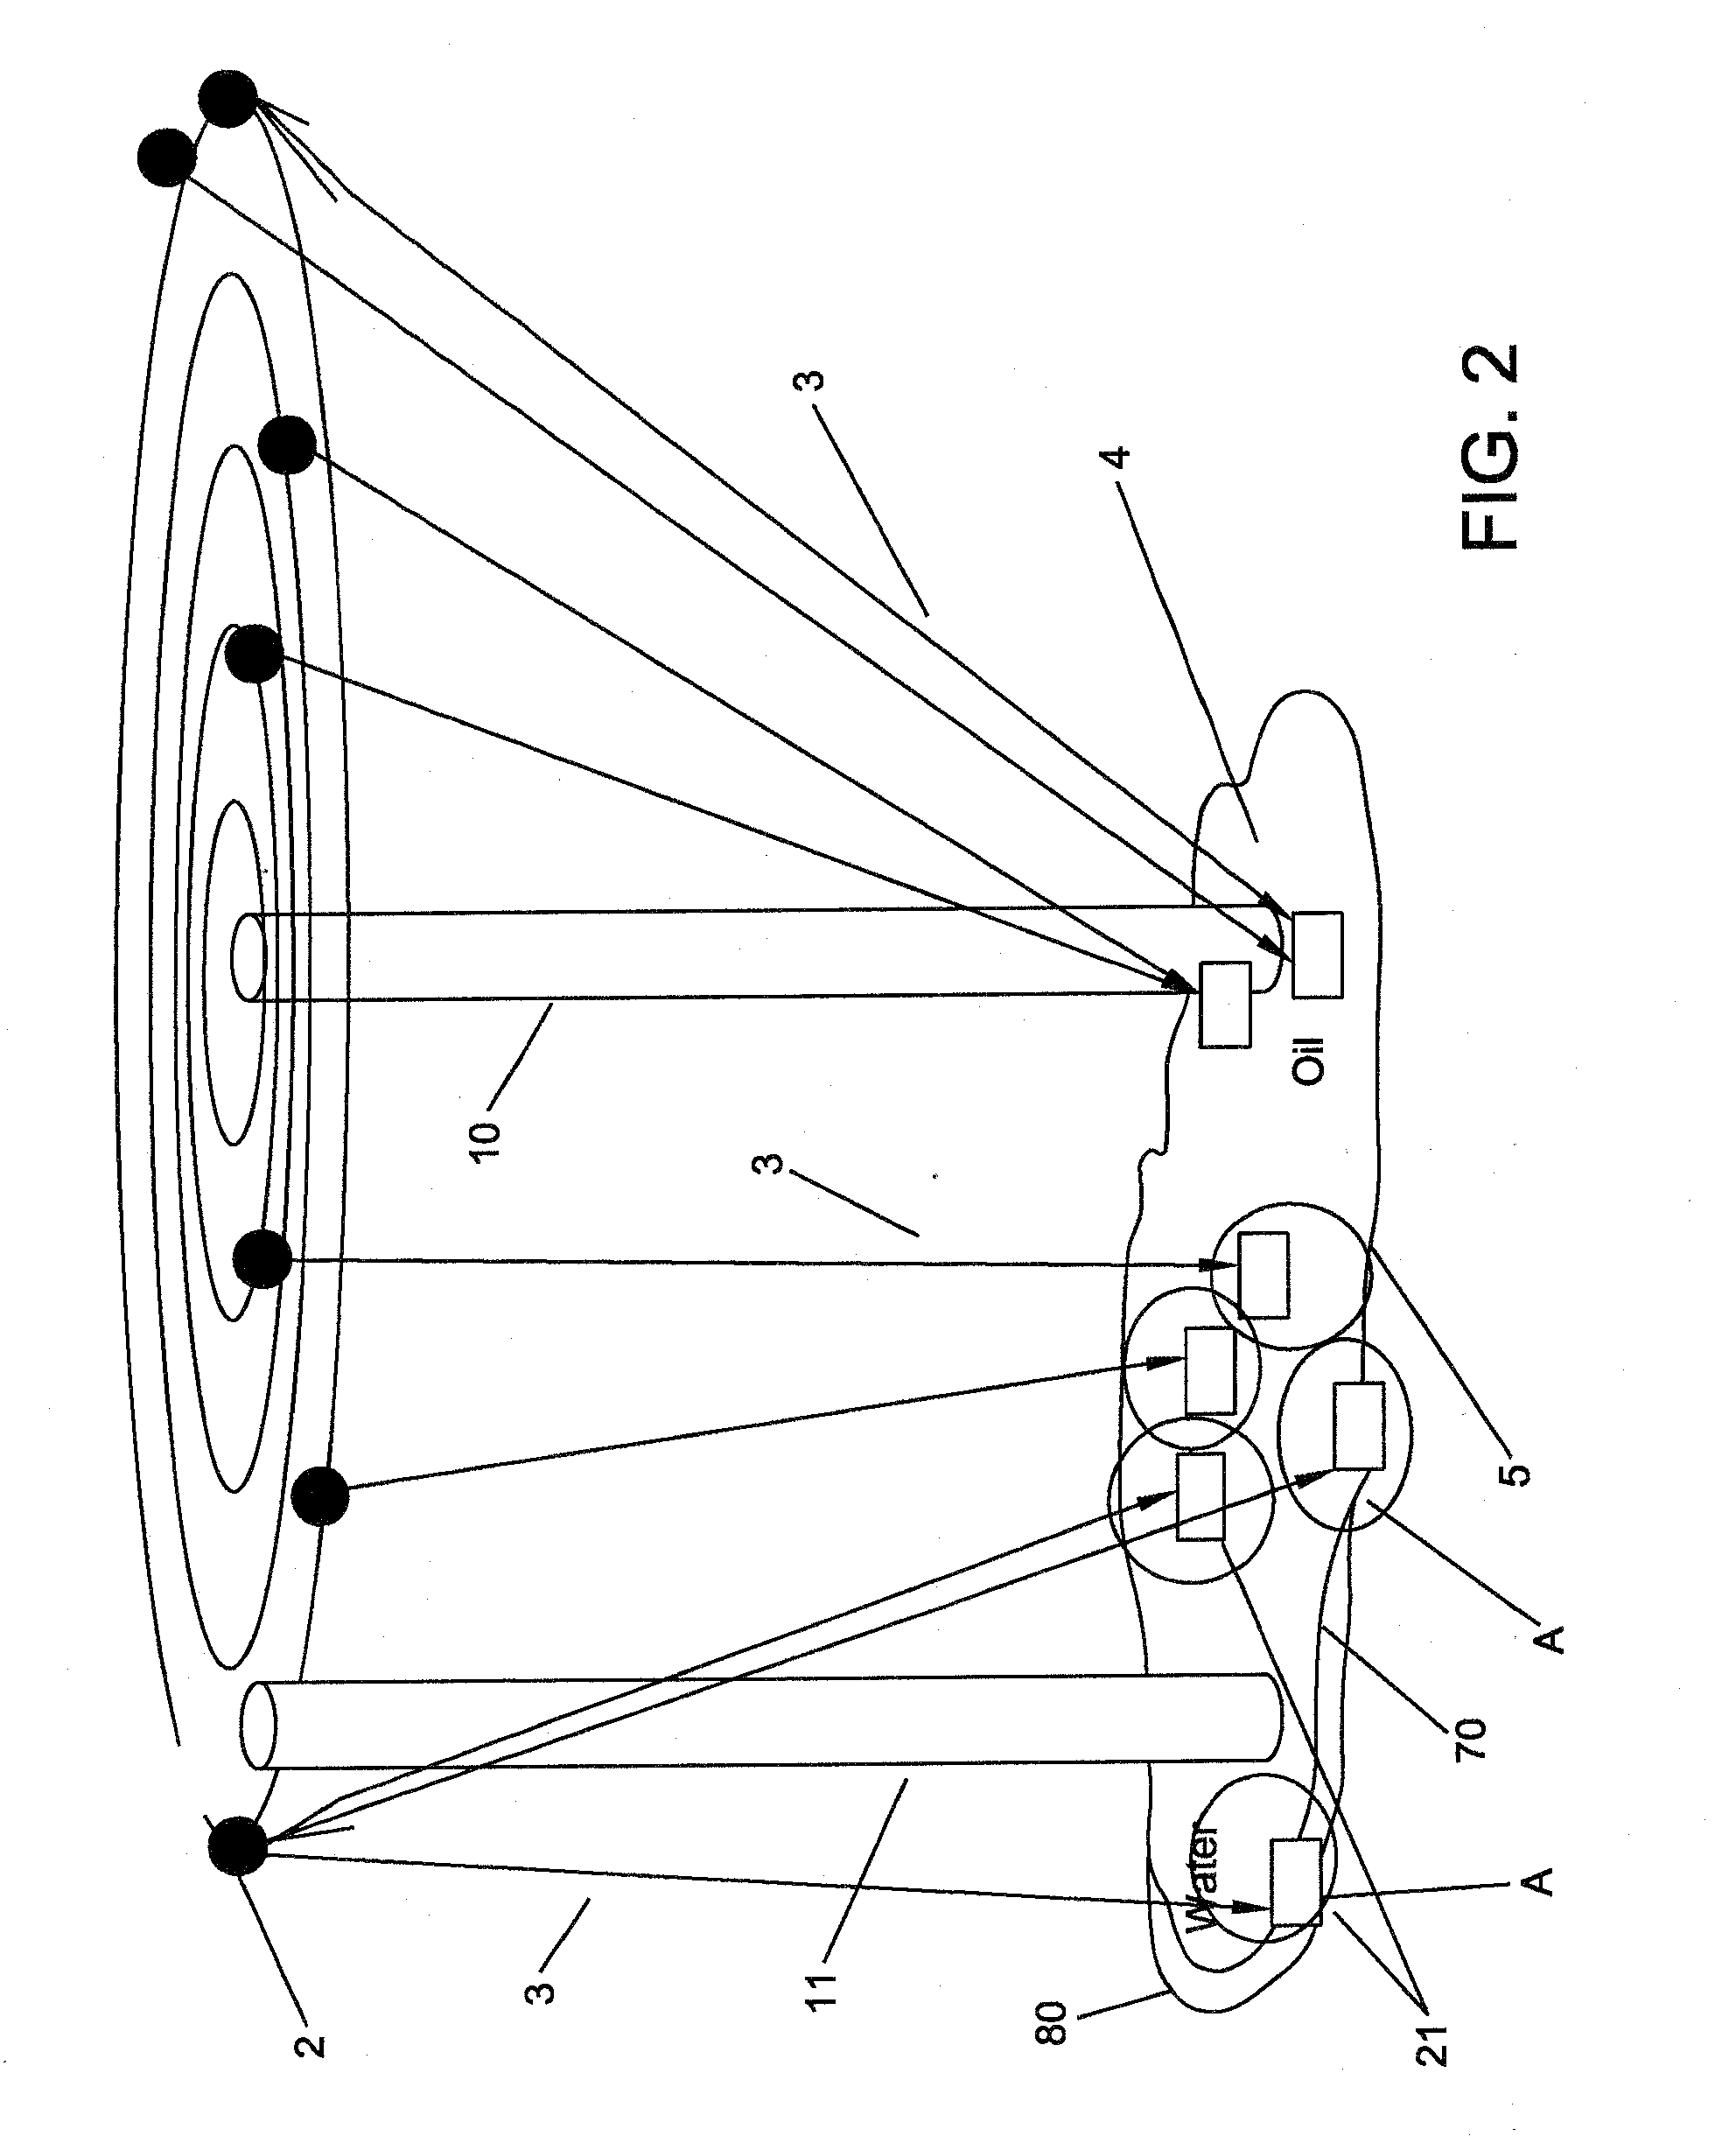 System and method to remotely interact with NANO devices in an oil well and/or water reservoir using electromagnetic transmission